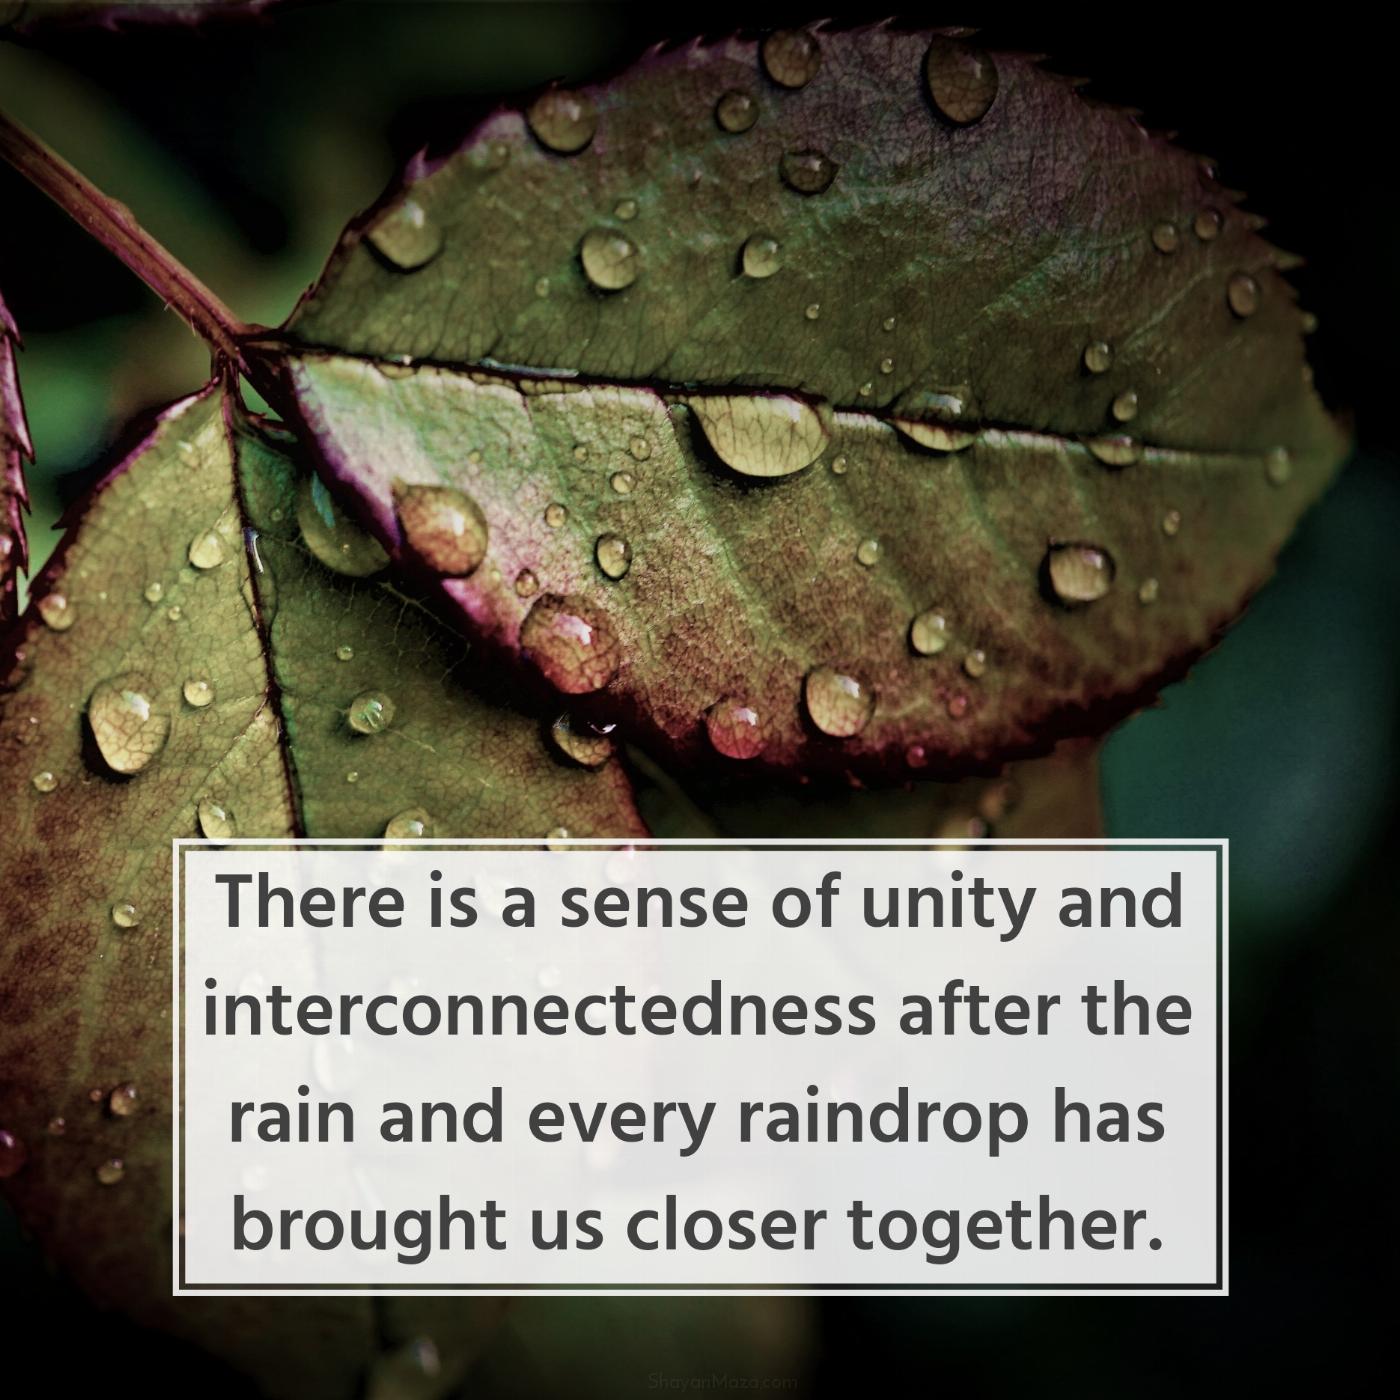 There is a sense of unity and interconnectedness after the rain